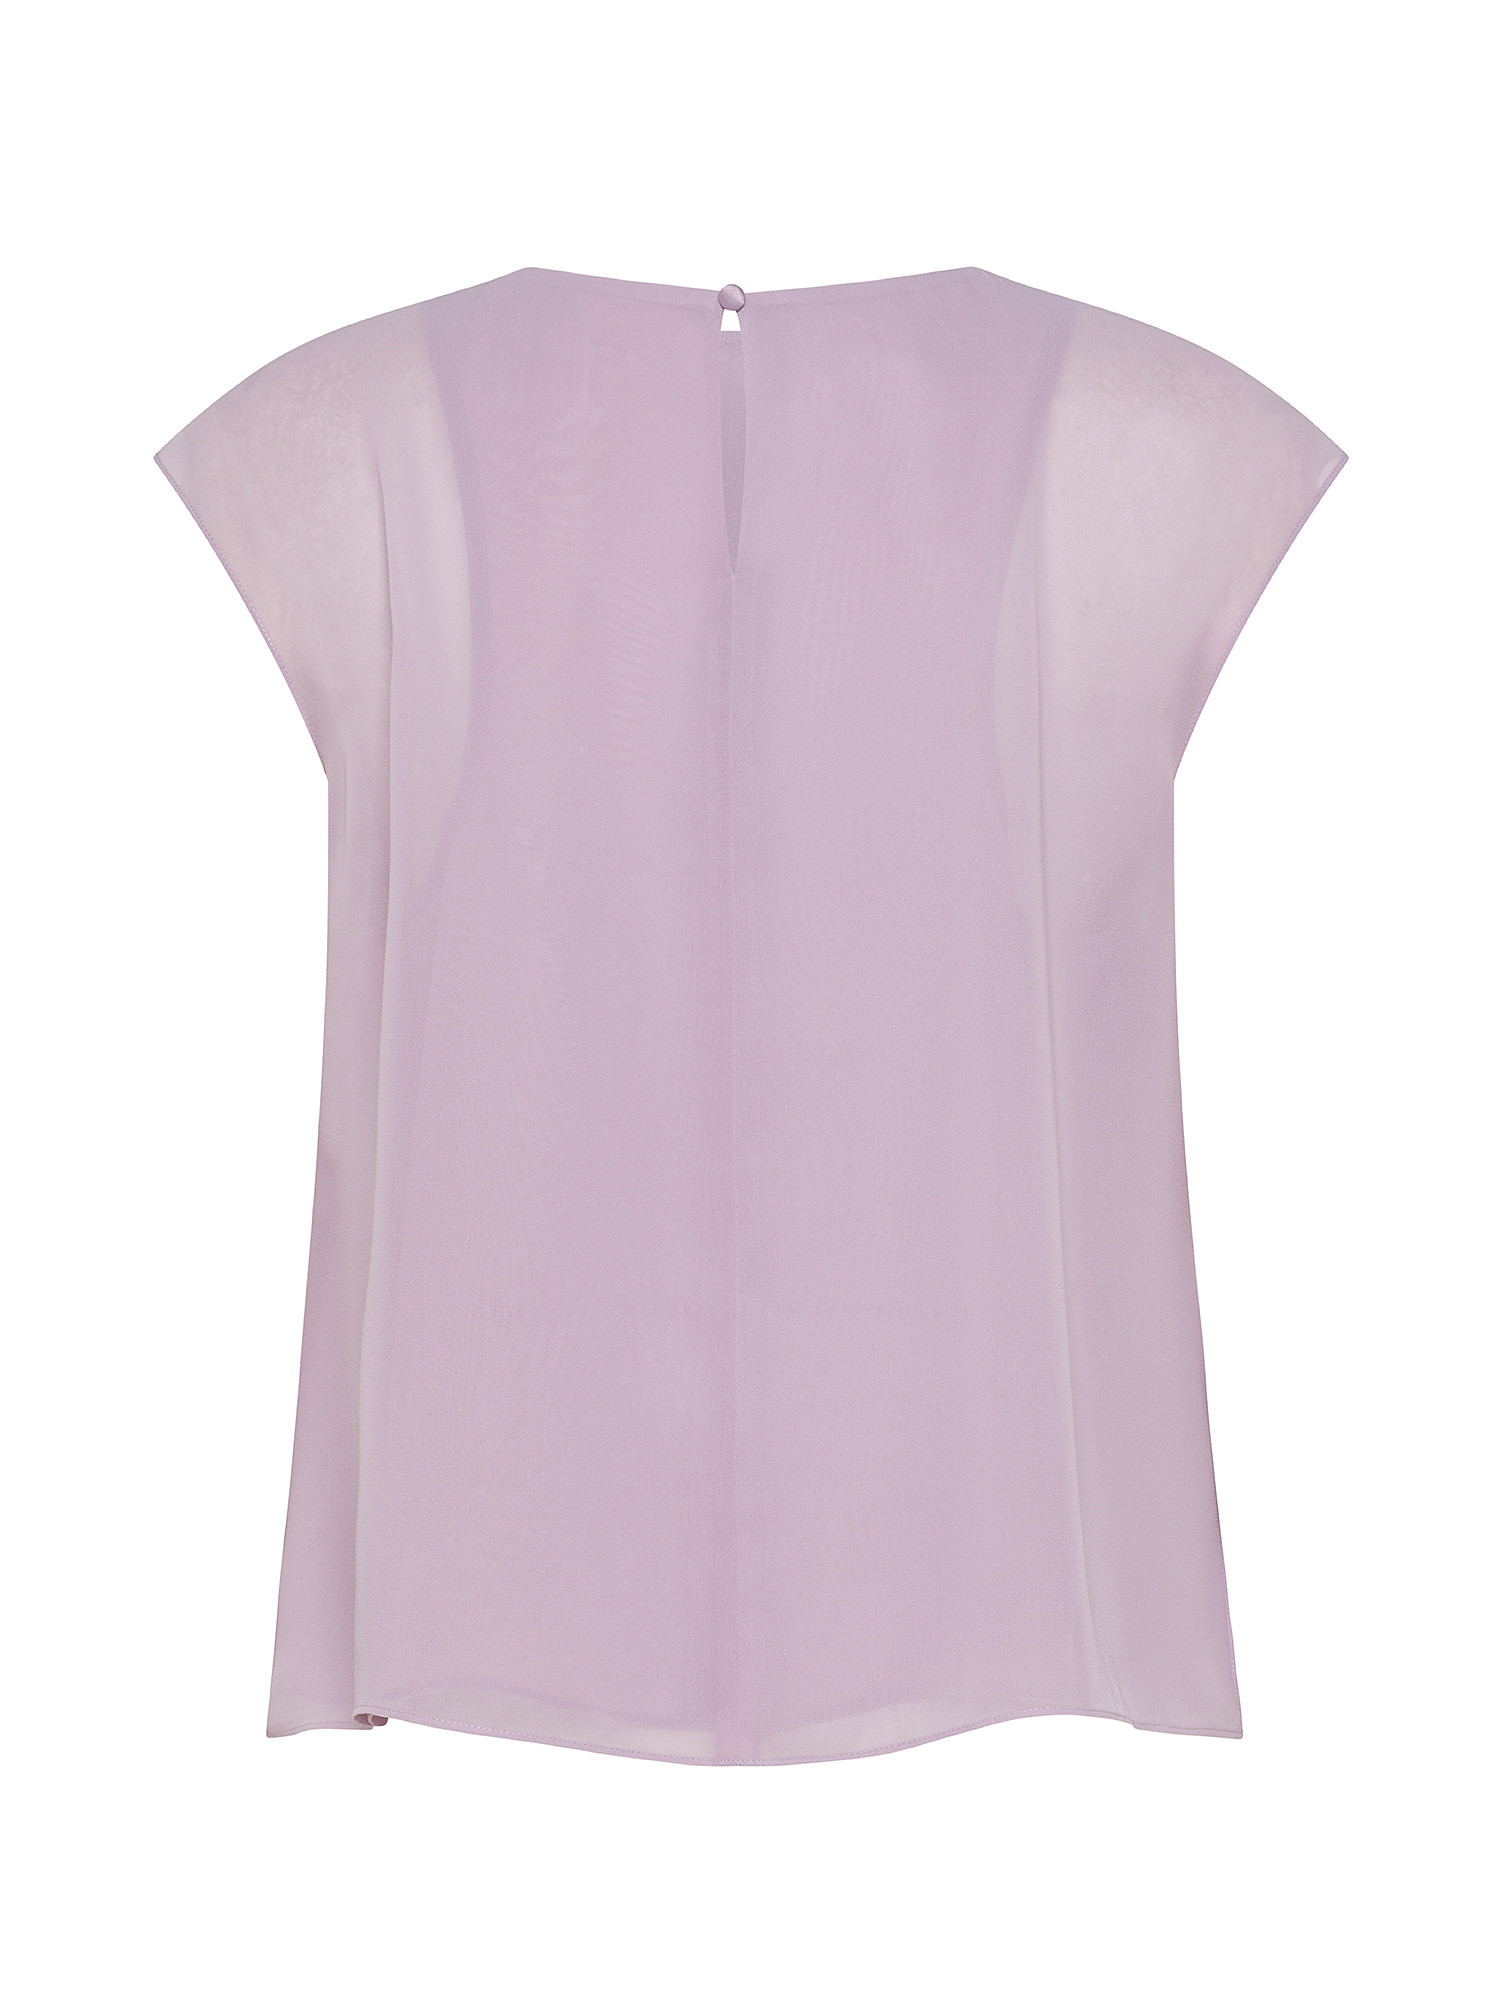 Emporio Armani - Top with slit, Light Pink, large image number 1